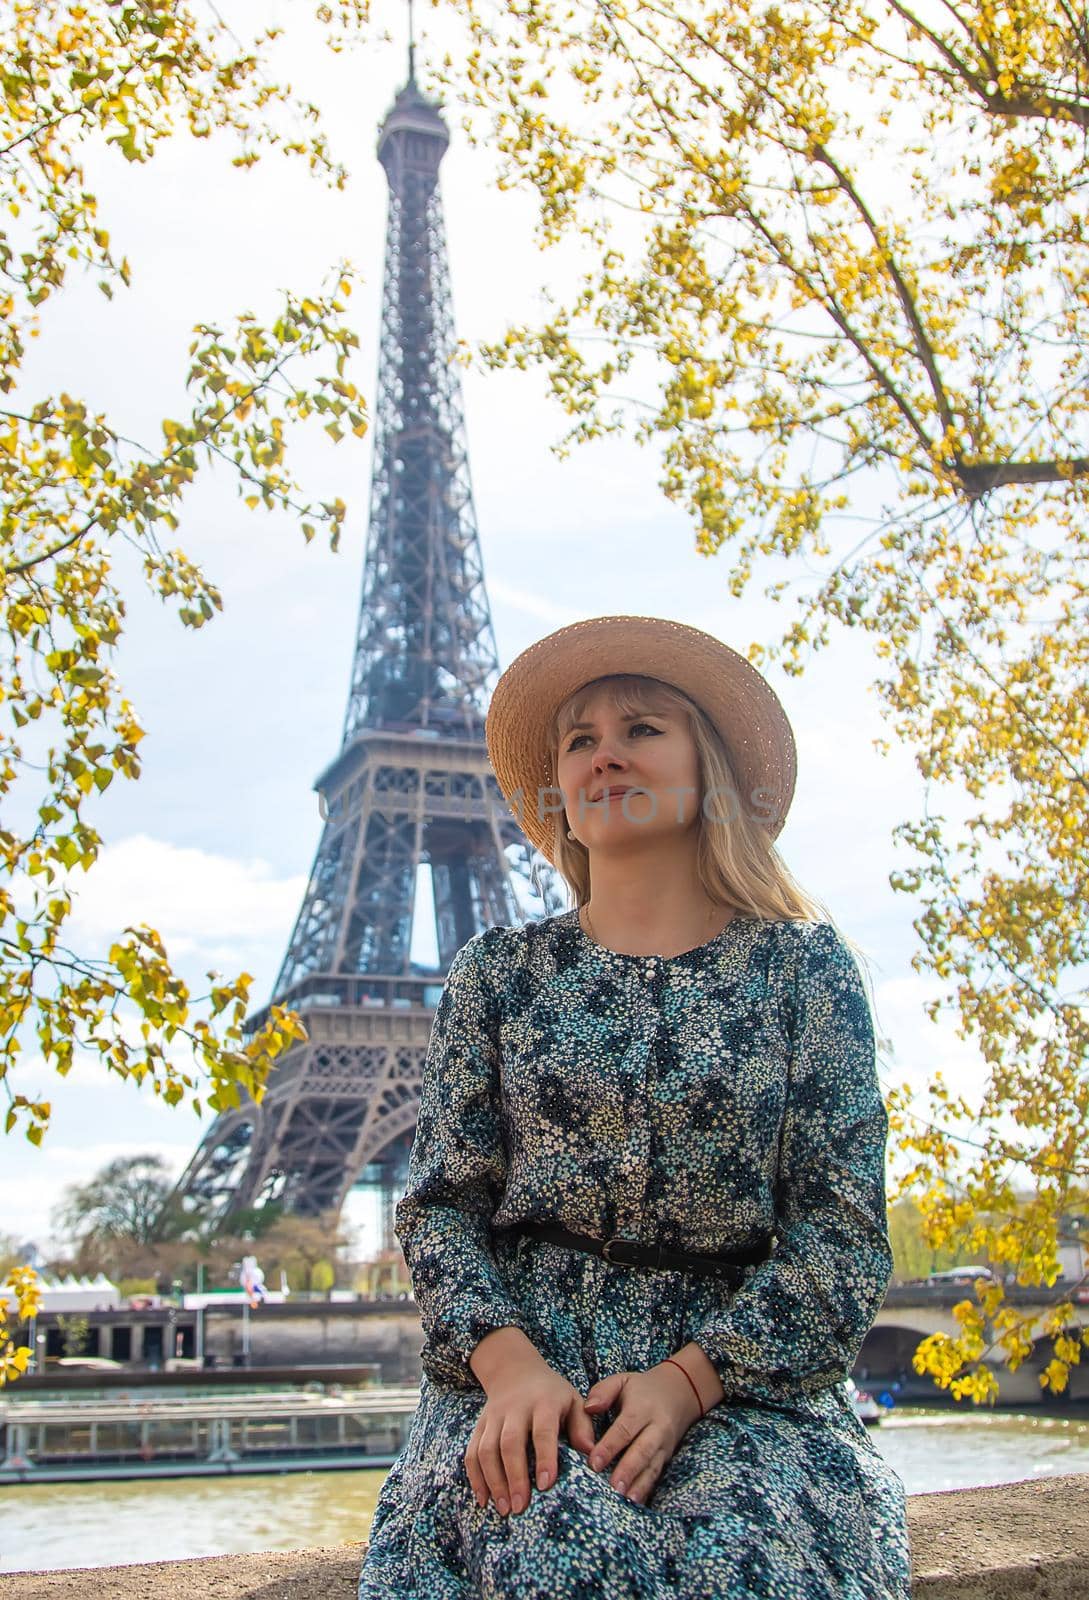 Woman in a hat near the eiffel tower. Selective focus. People.